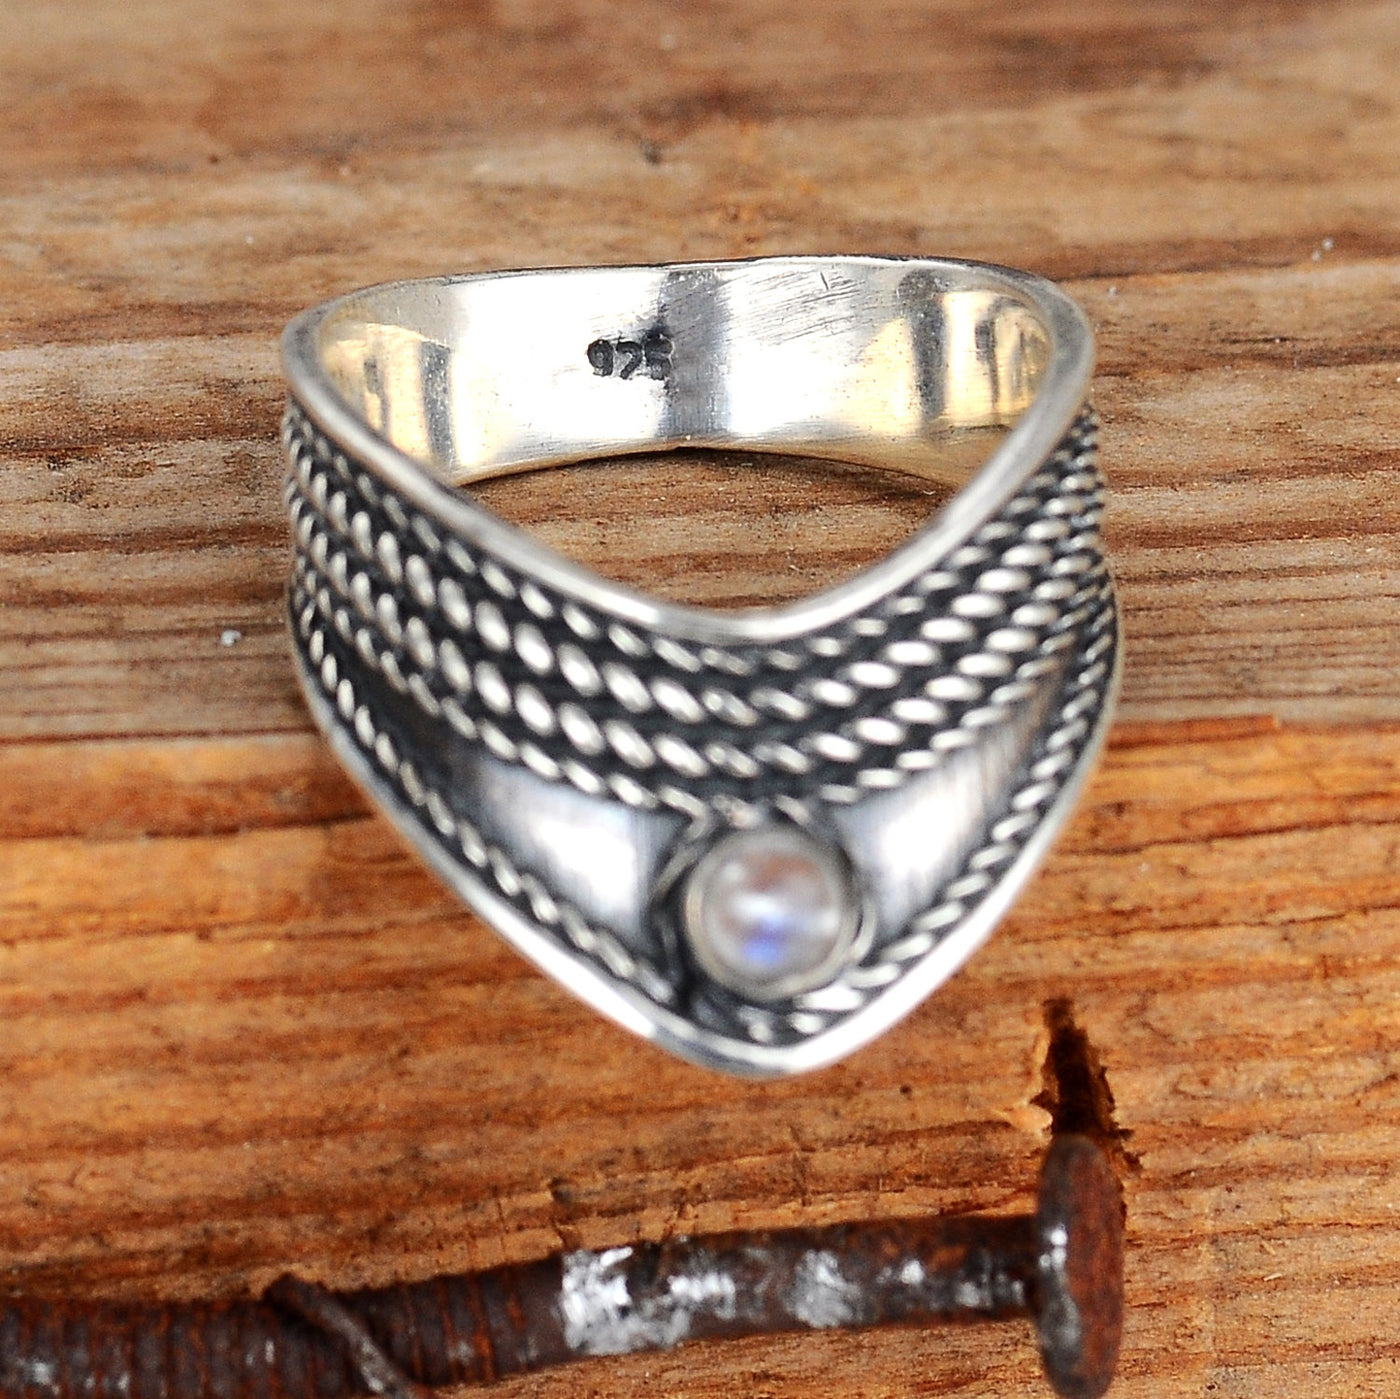 Chevron Thumb Ring with Moonstone Sterling Silver